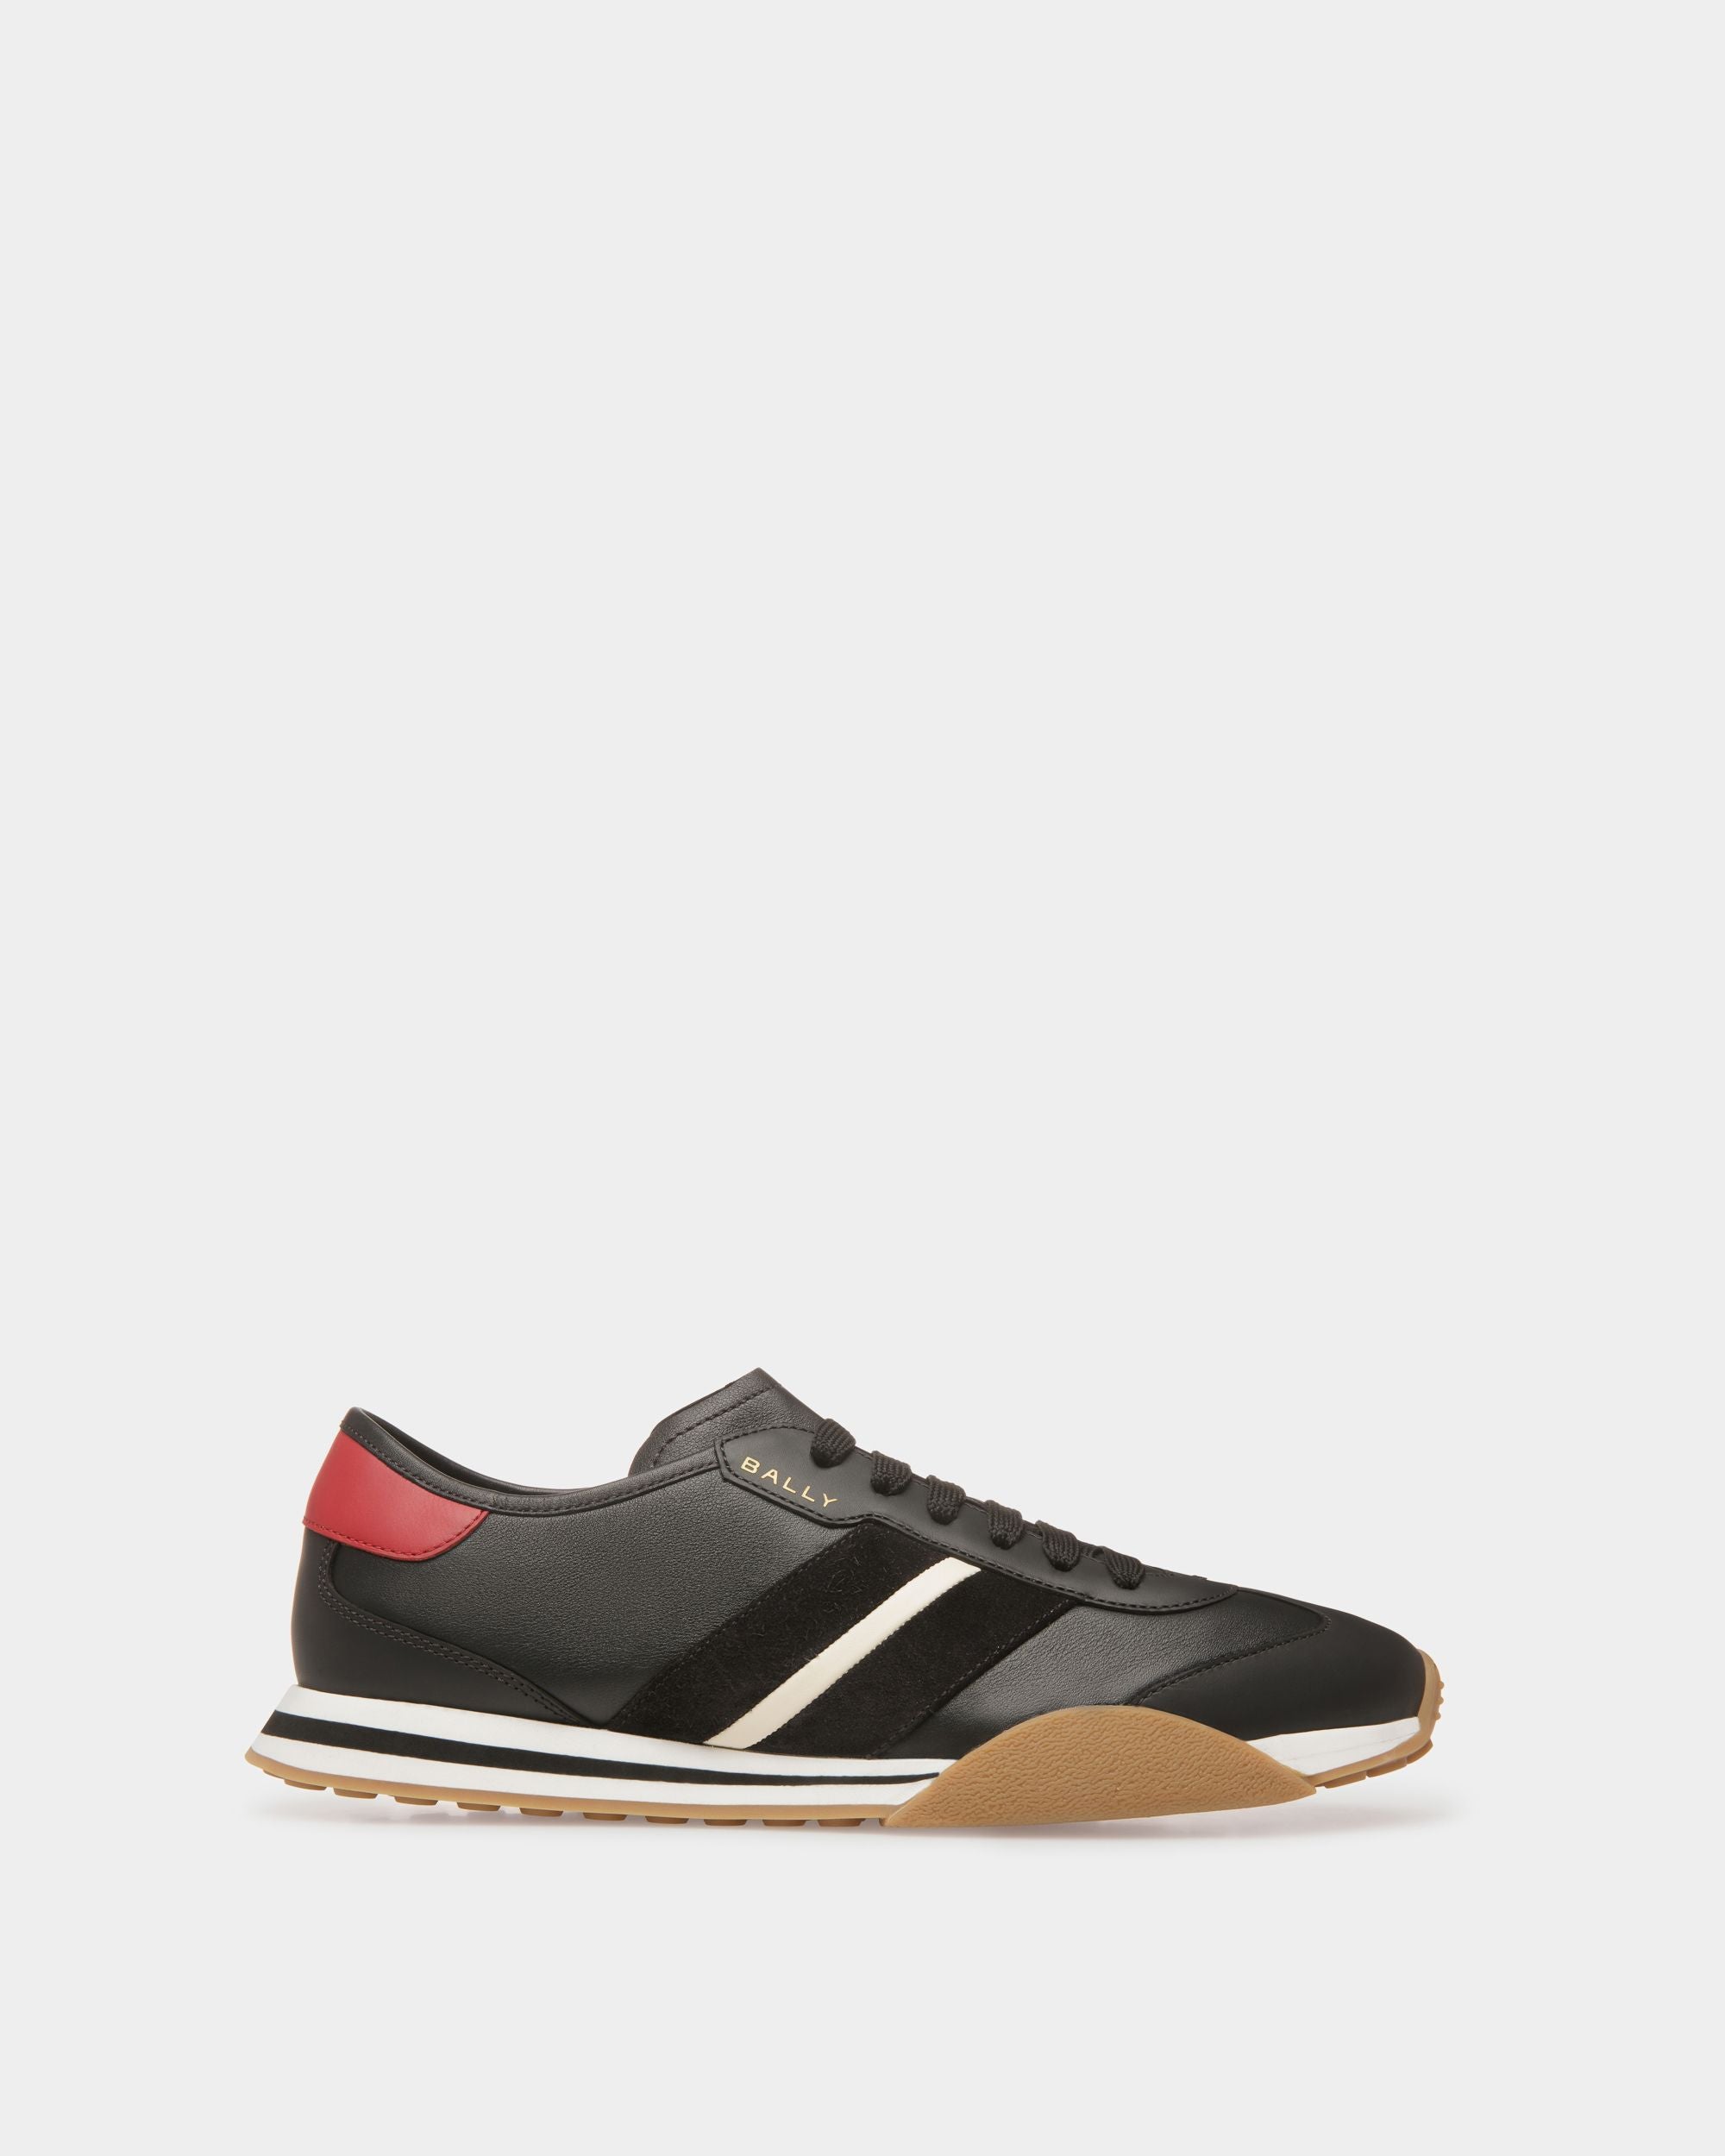 Stewy | Men's Sneakers | Marine And Bone Leather | Bally | Still Life Side